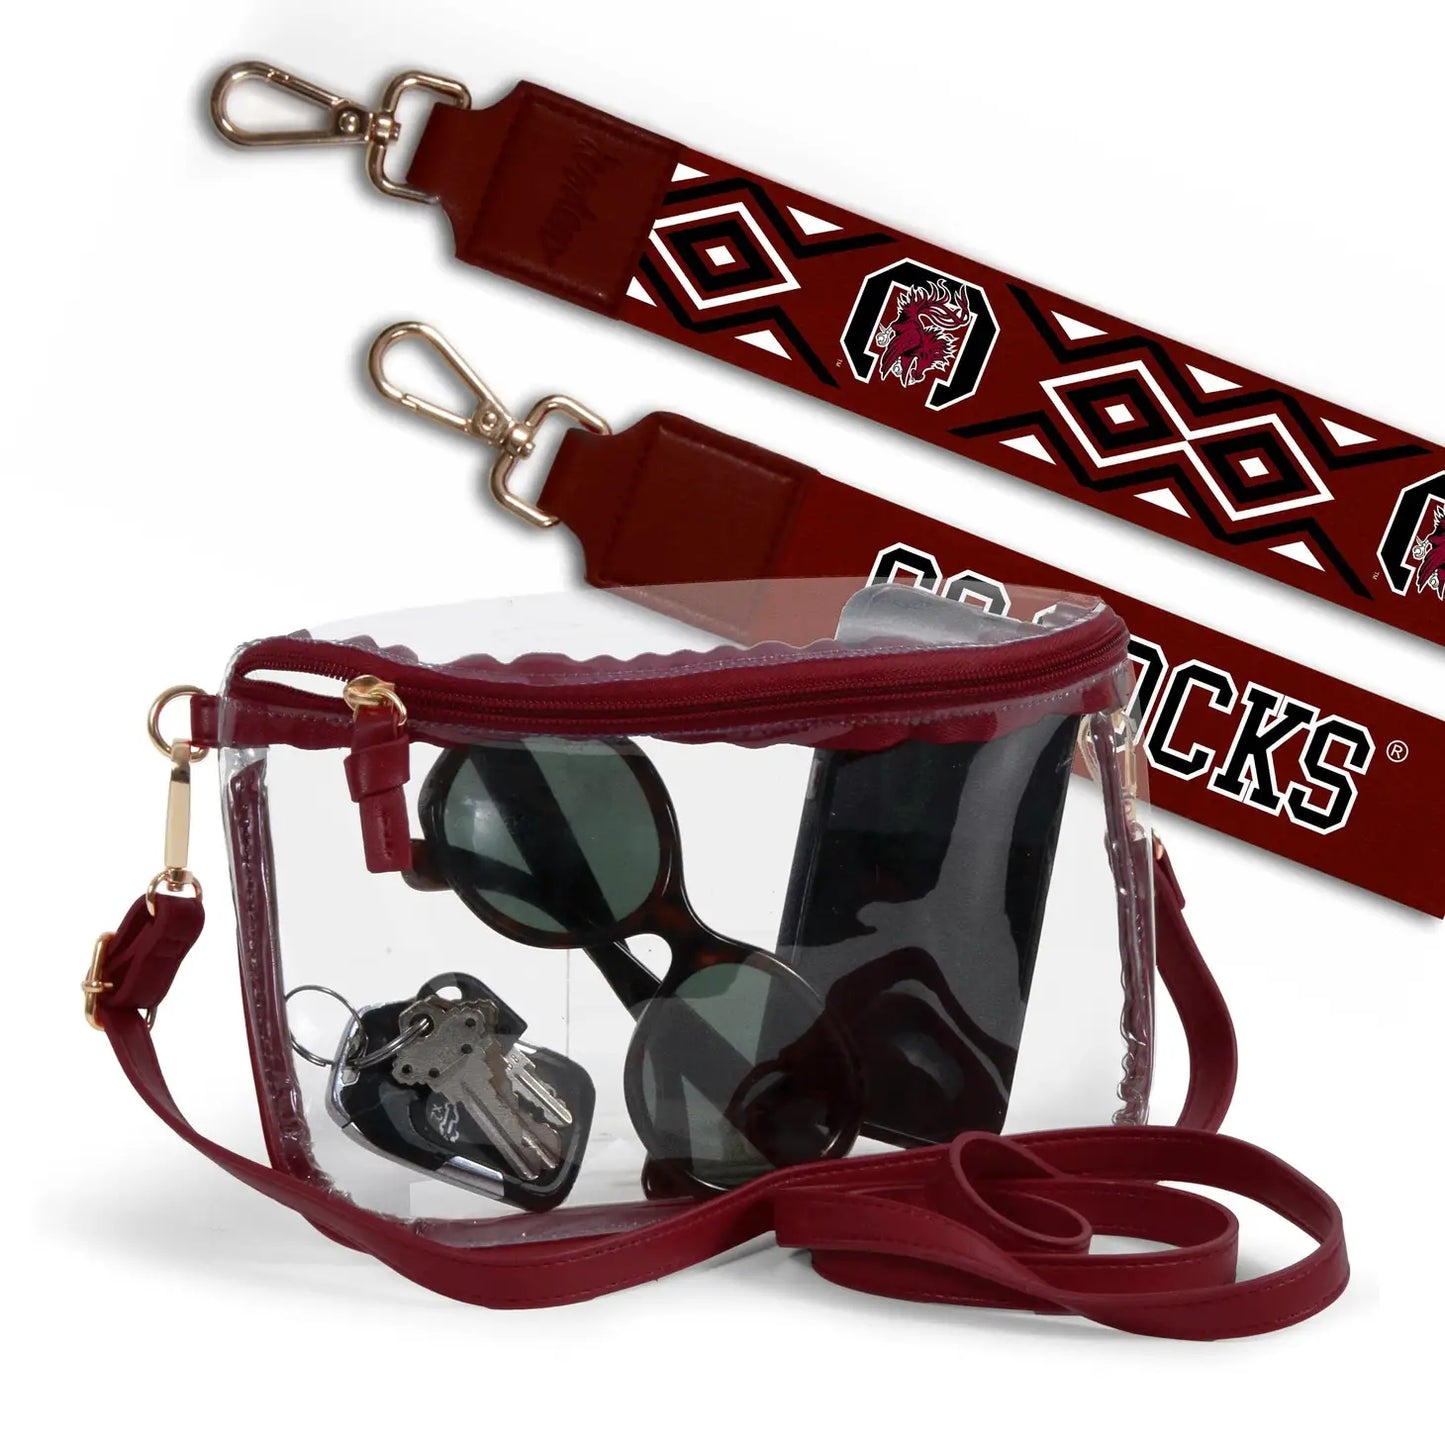 Lexi Clear Purse with USC Shoulder Strap